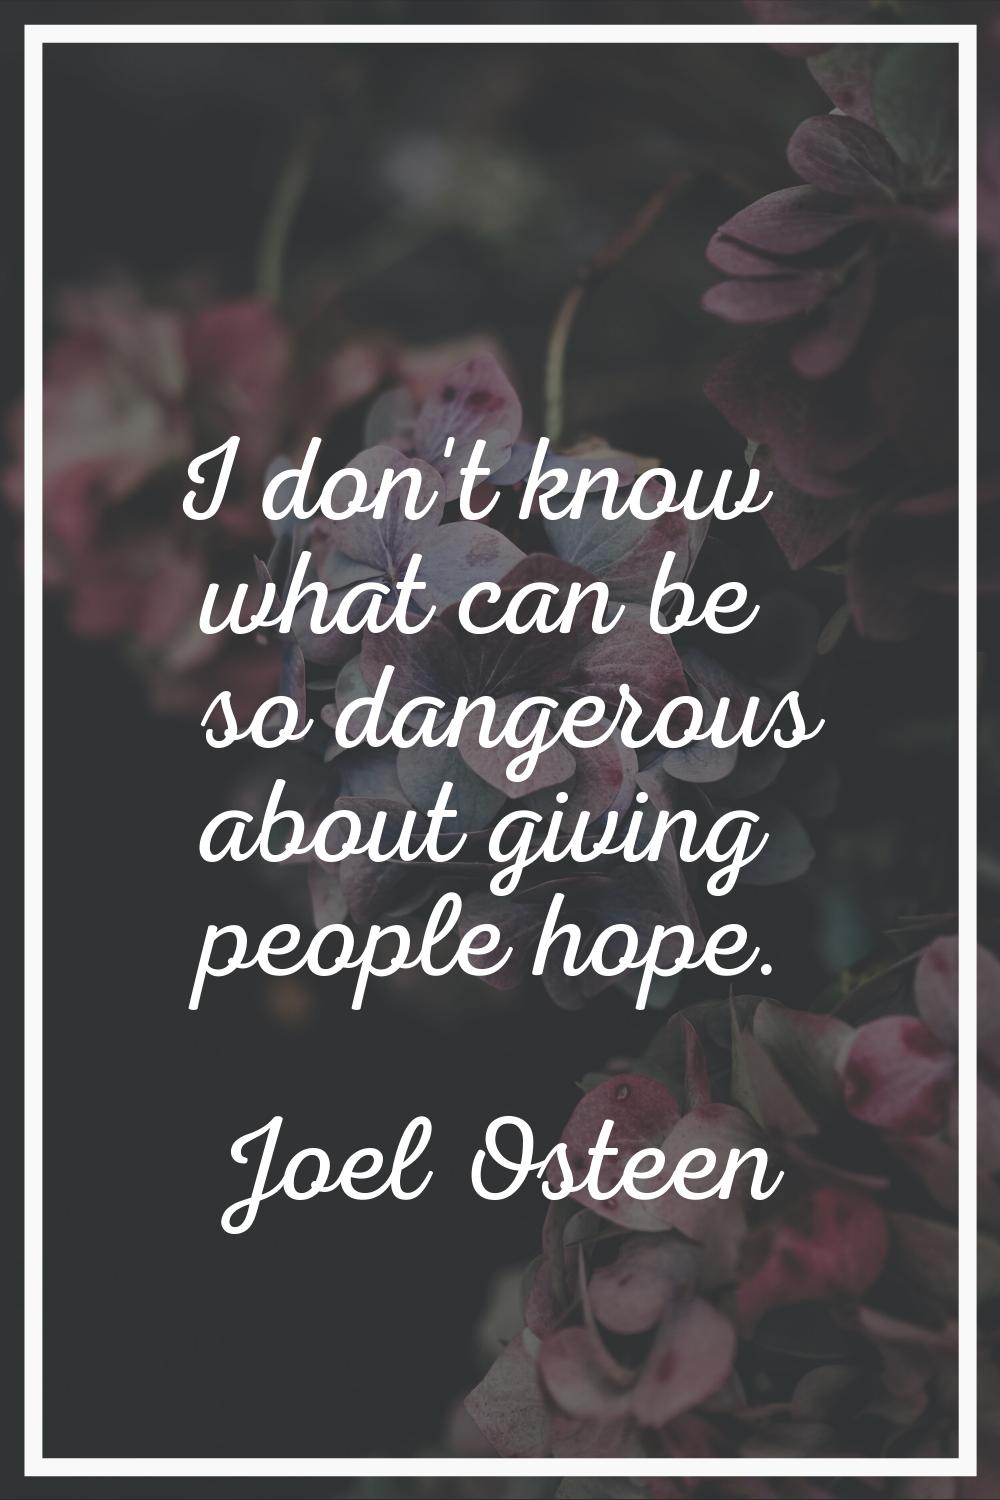 I don't know what can be so dangerous about giving people hope.